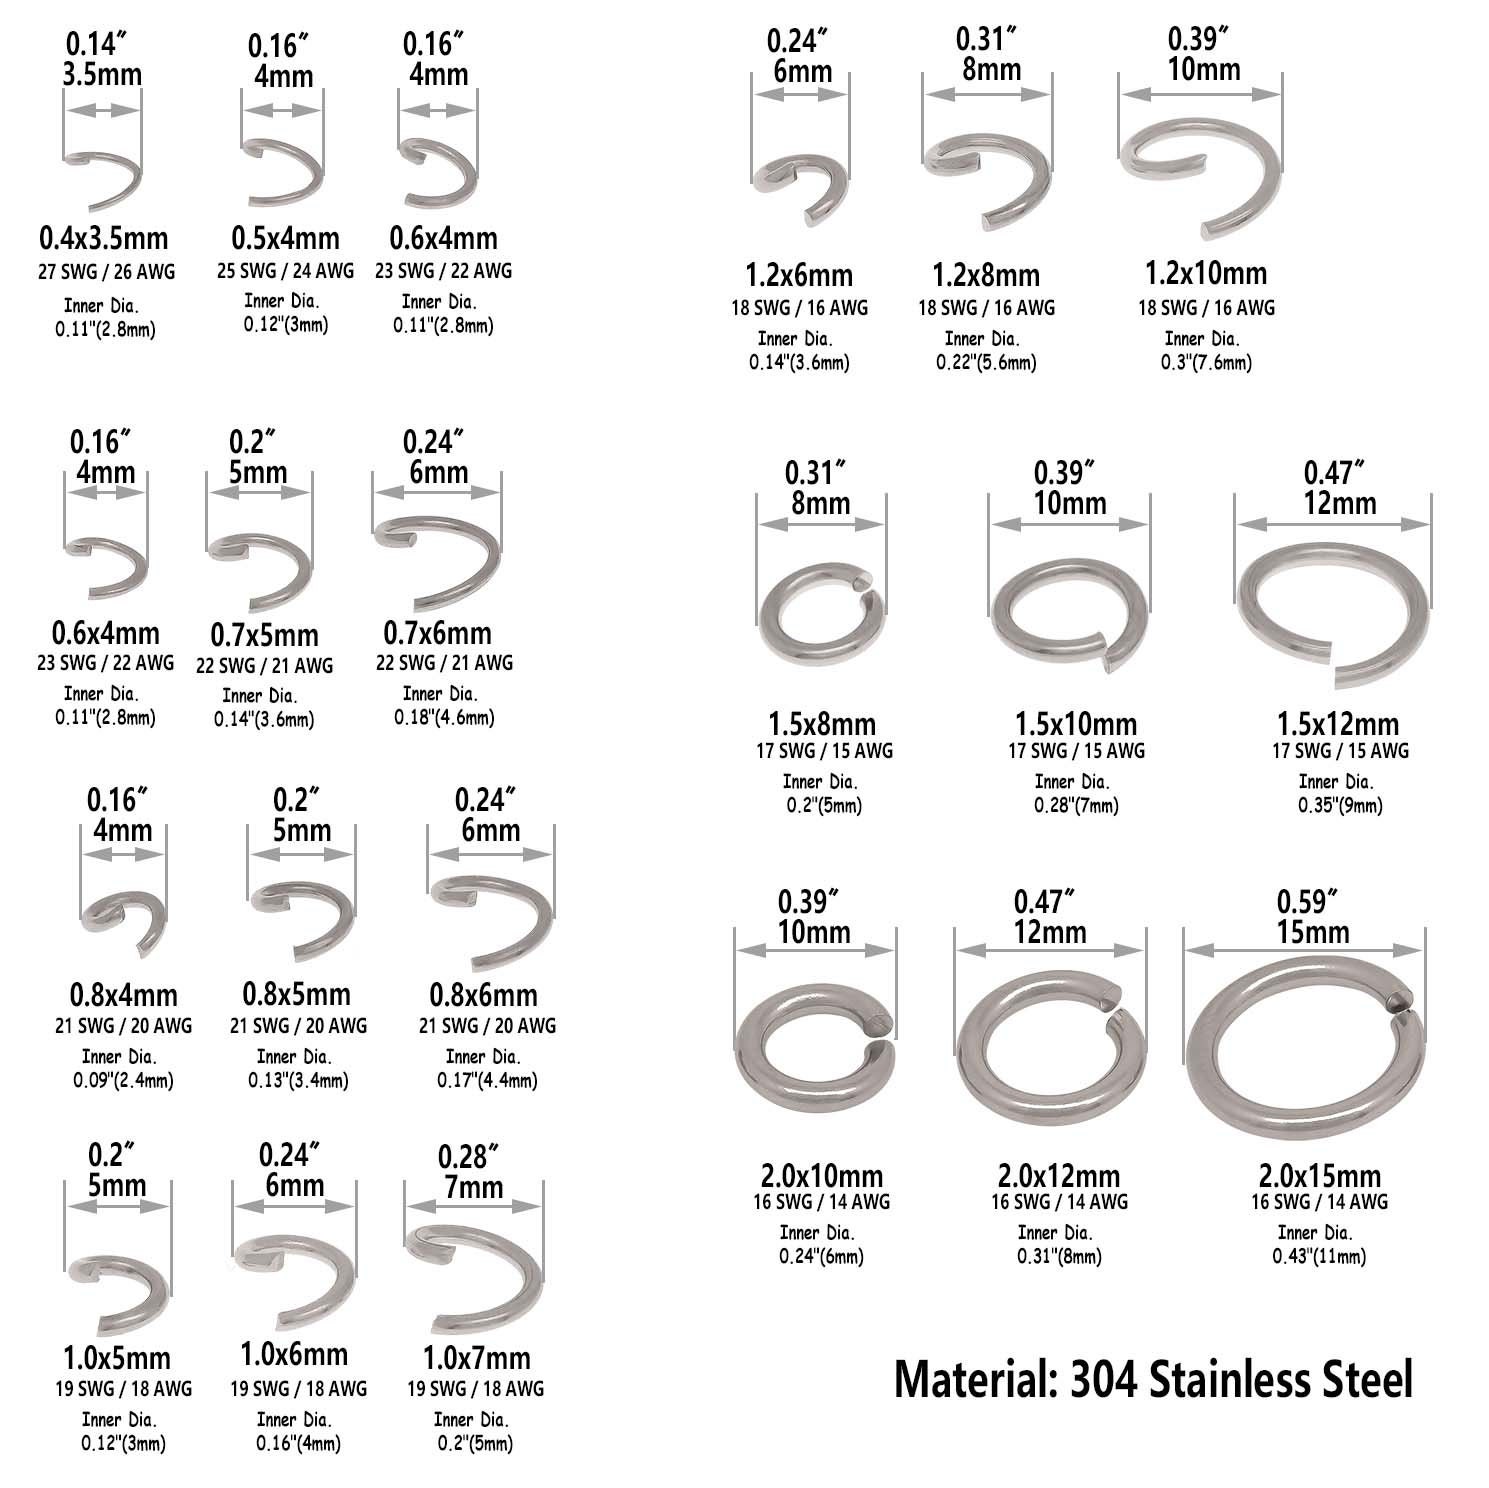 100pcs 925 Sterling Silver Open Jump Rings, 20 Gauge 4.0mm OD/2.4mm ID Made in USA by Craft Wire